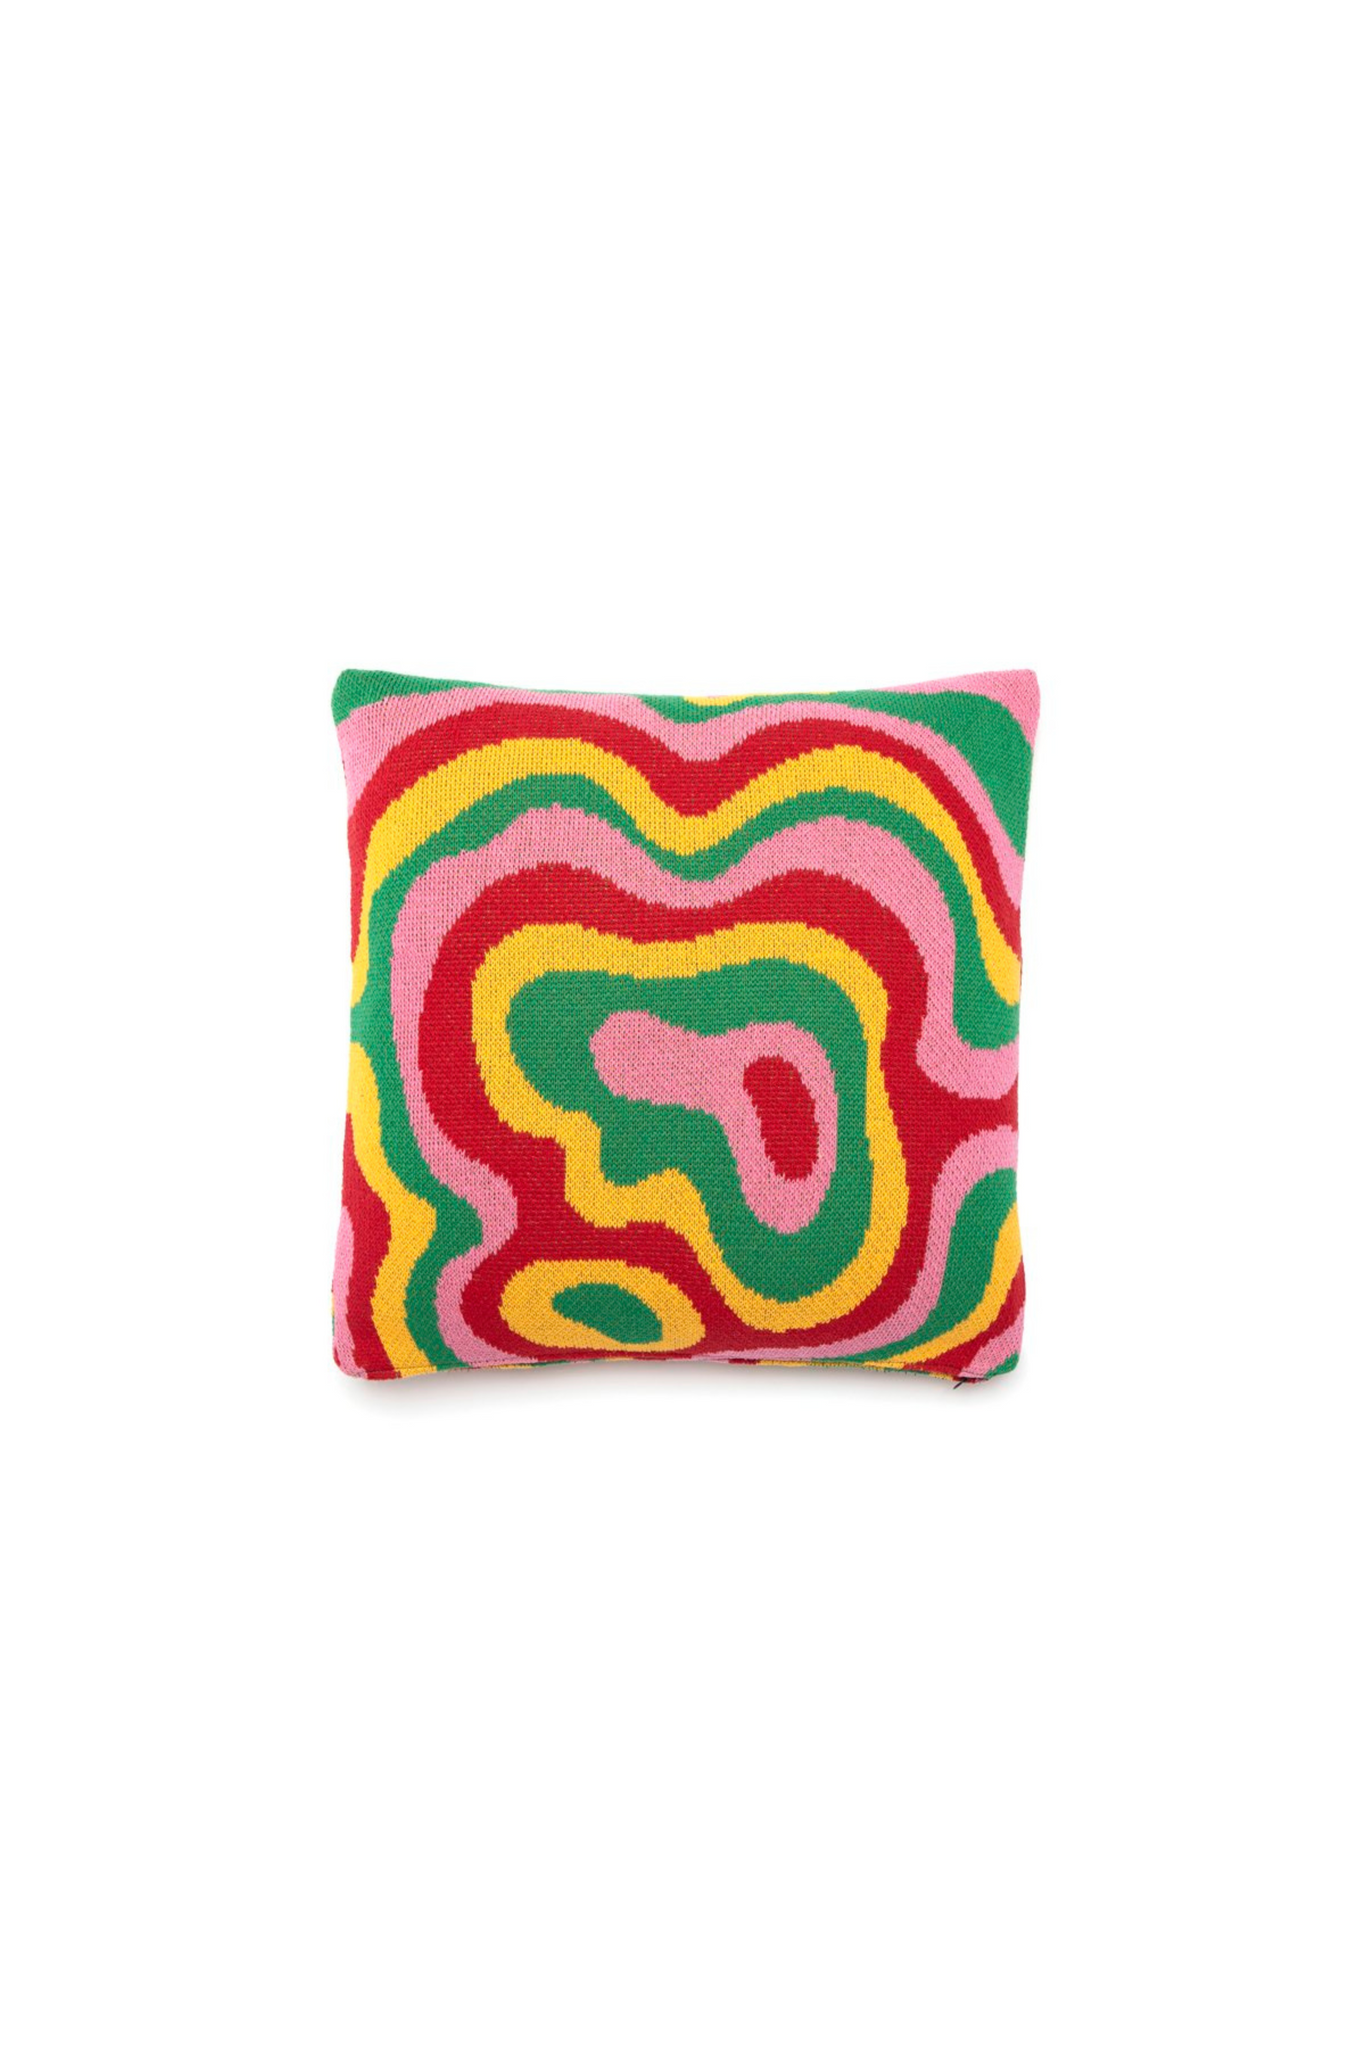 Fruit Punch Psychedelic Pillow Cover by Zoe Schlacter